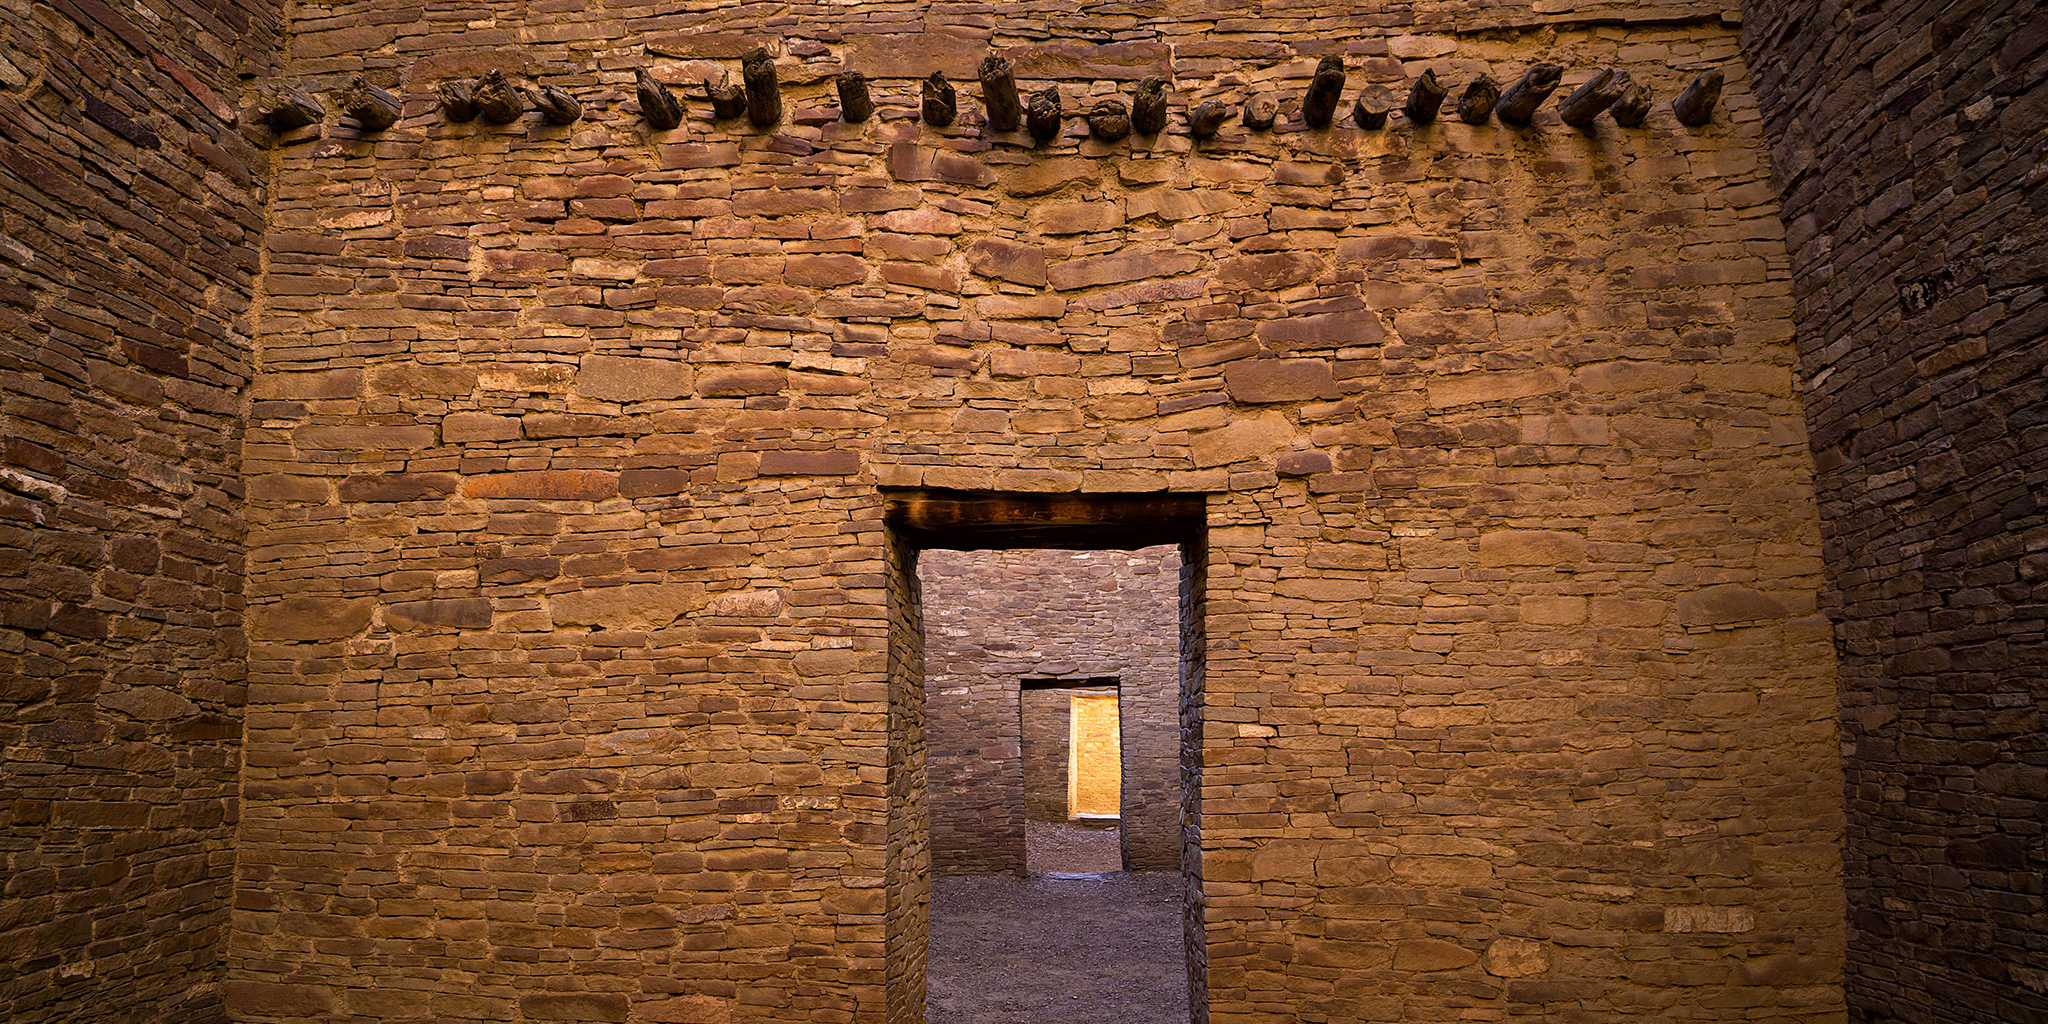 Black Friday in Chaco Canyon